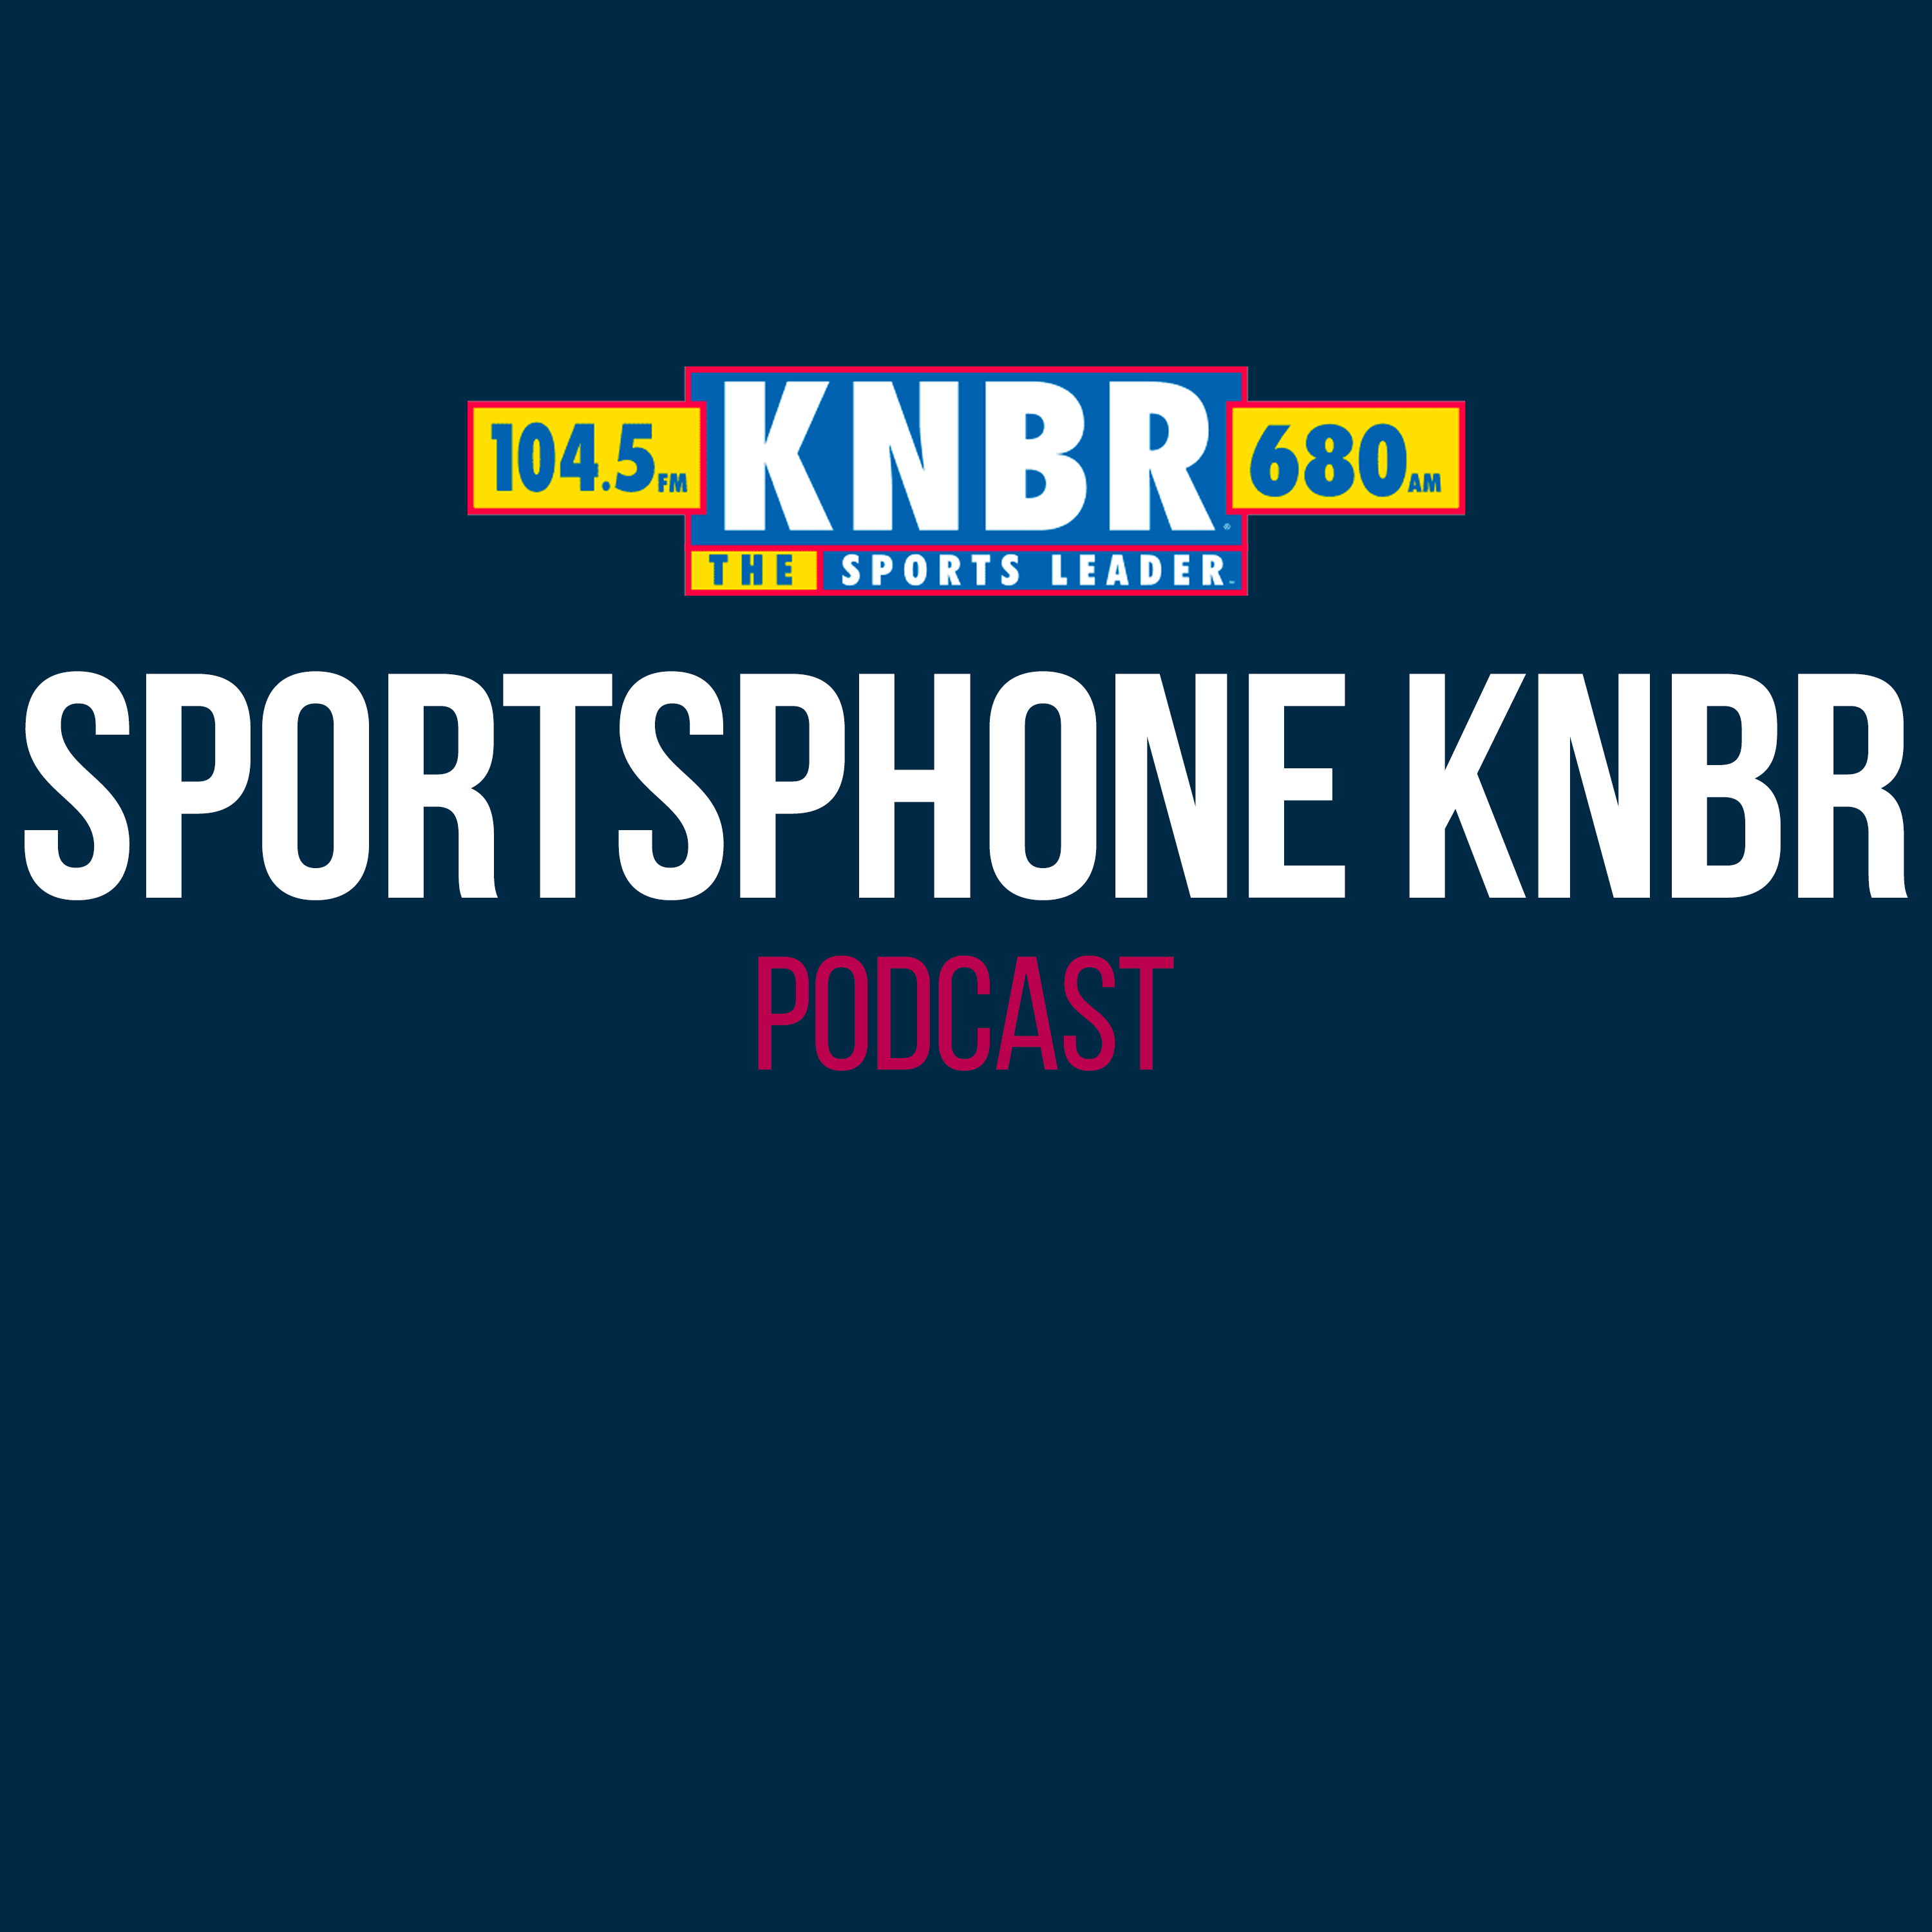 5-20 Jim Gott joins Bill Laskey on Sportsphone KNBR to discuss Heliot Ramos, Luis Matos, and Marco Luciano's acclimation into the big leagues